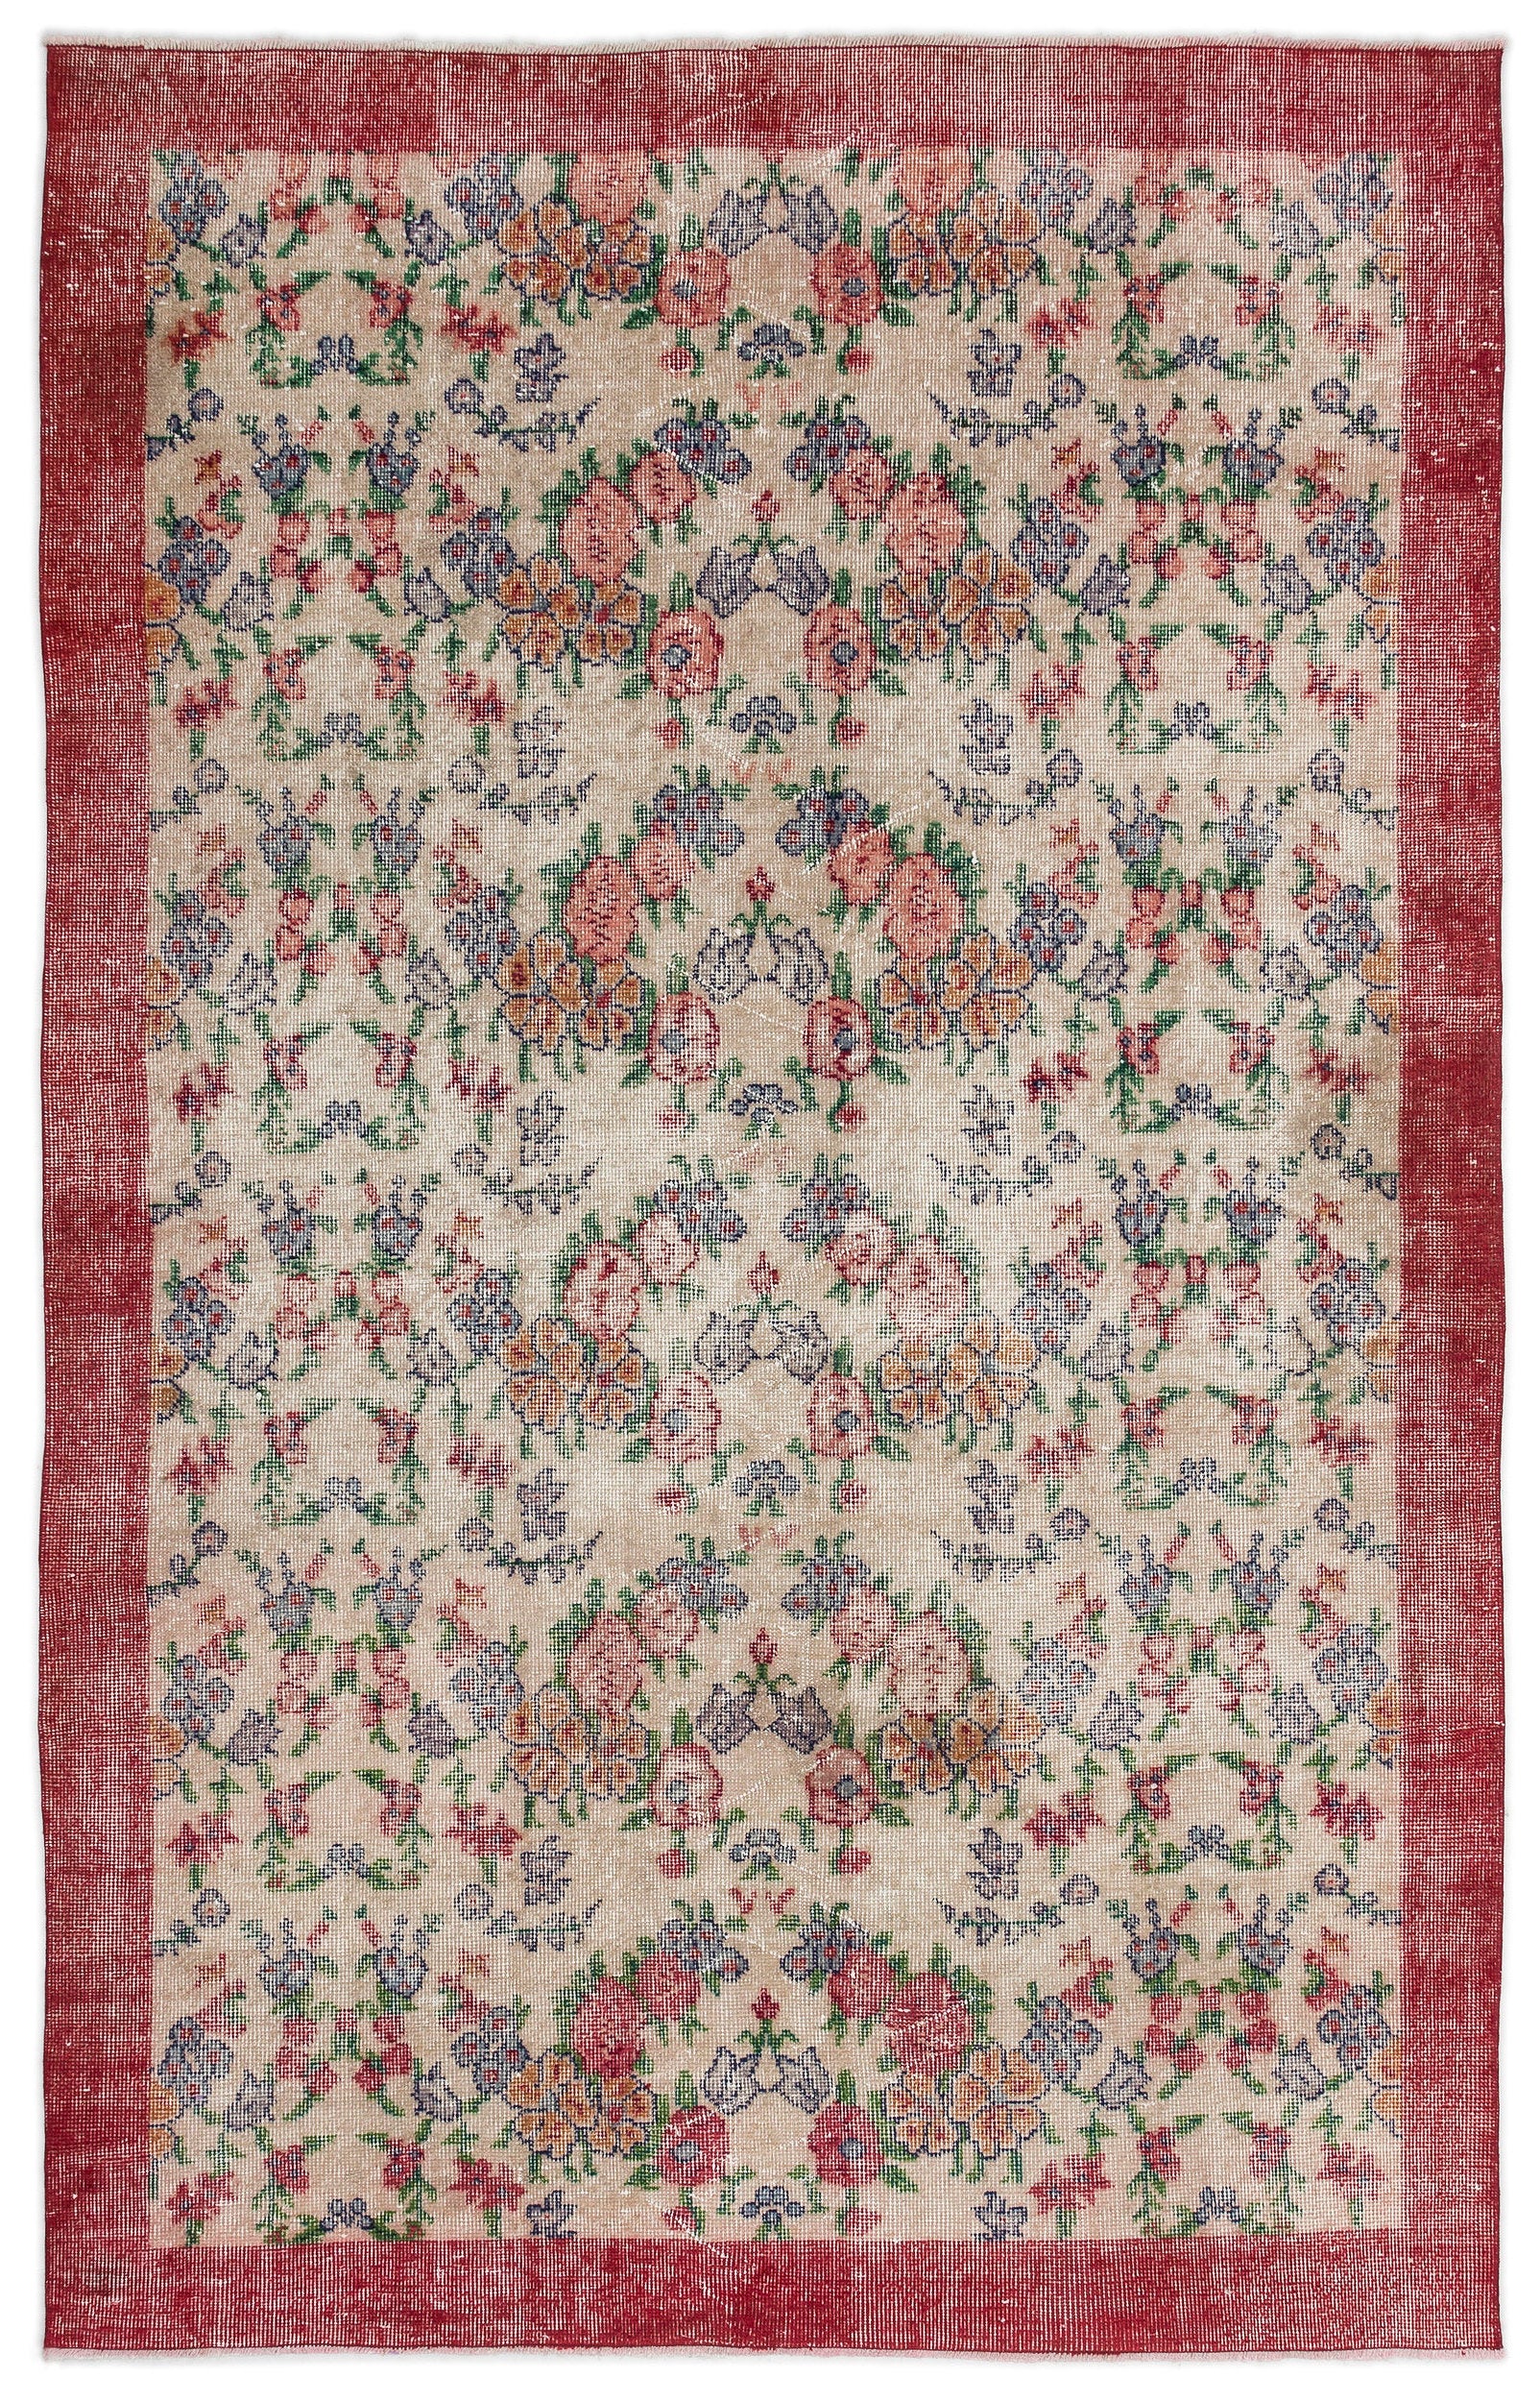 Retro Over Dyed Vintage Rug 5'5'' x 8'8'' ft 165 x 264 cm